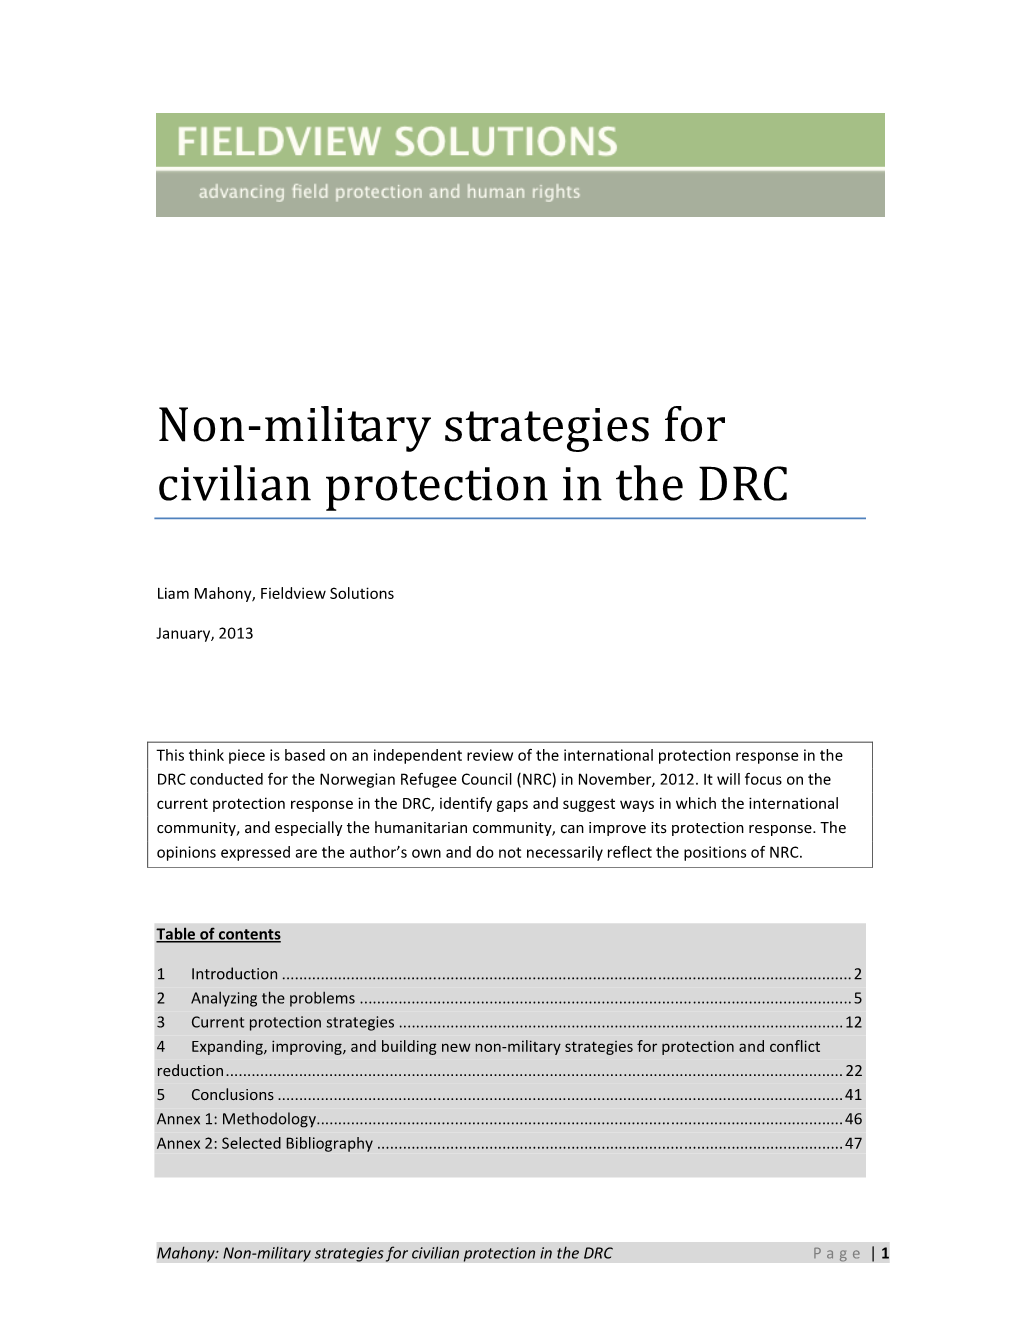 Non-Military Strategies for Civilian Protection in the DRC